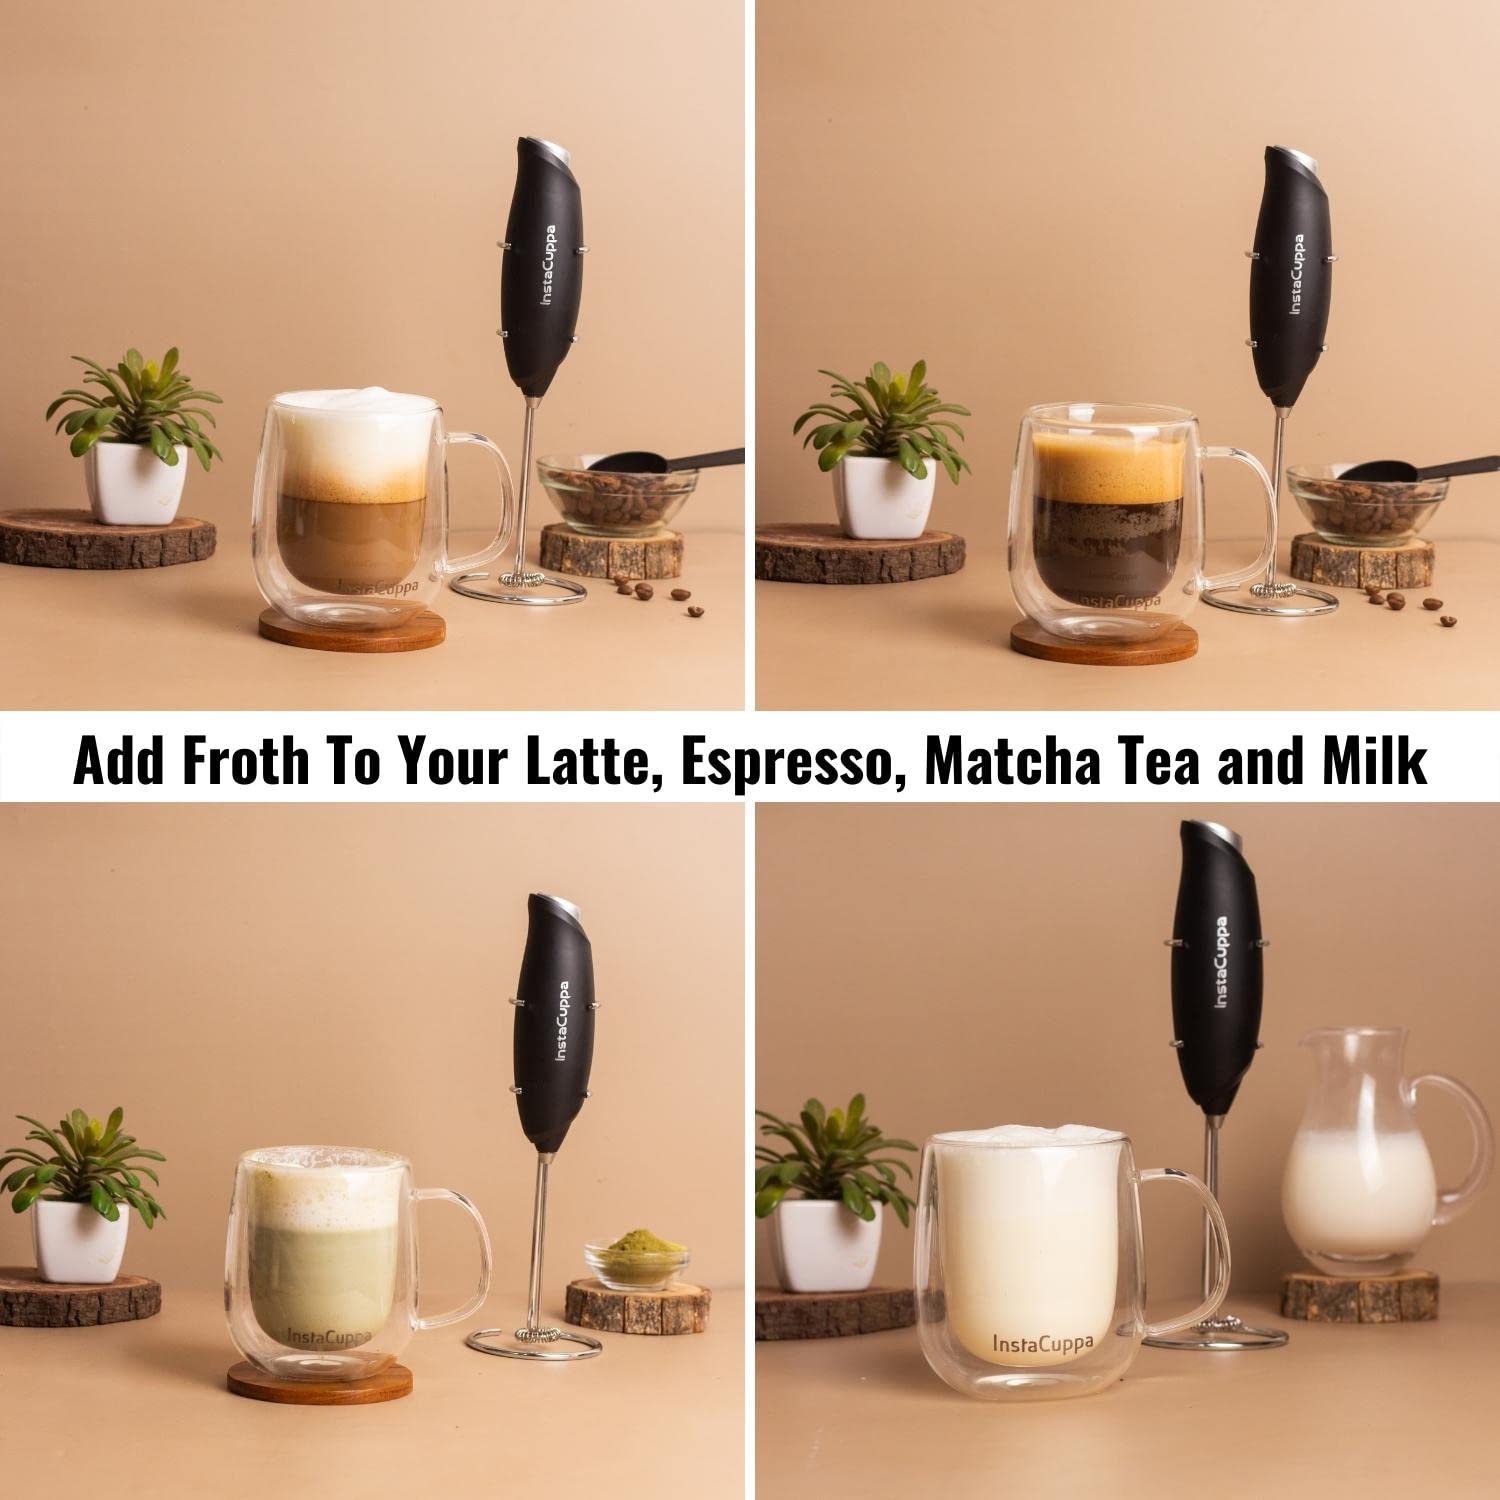 InstaCuppa Travel Milk Frother Coffee Beater with Steel Travel